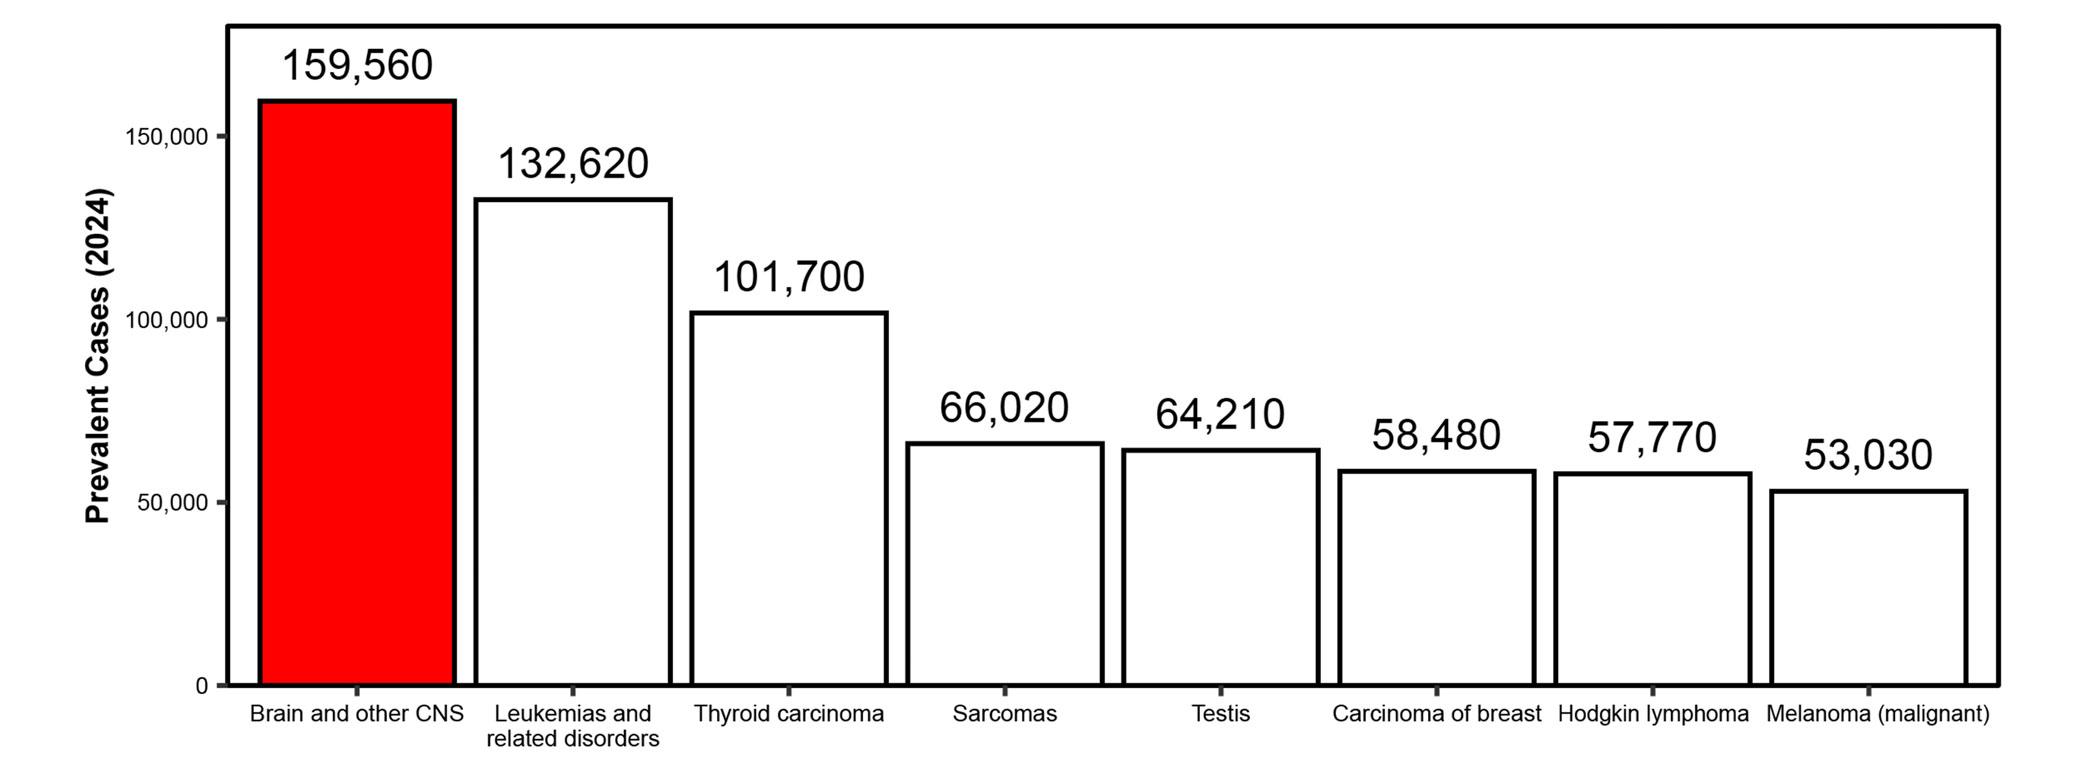 Bar graph showing estimated prevalence of the eight most common cancer types in children and adolescents in the United States during 2024. Brain and other CNS tumors are estimated to be the highest, with 159,560 cases.